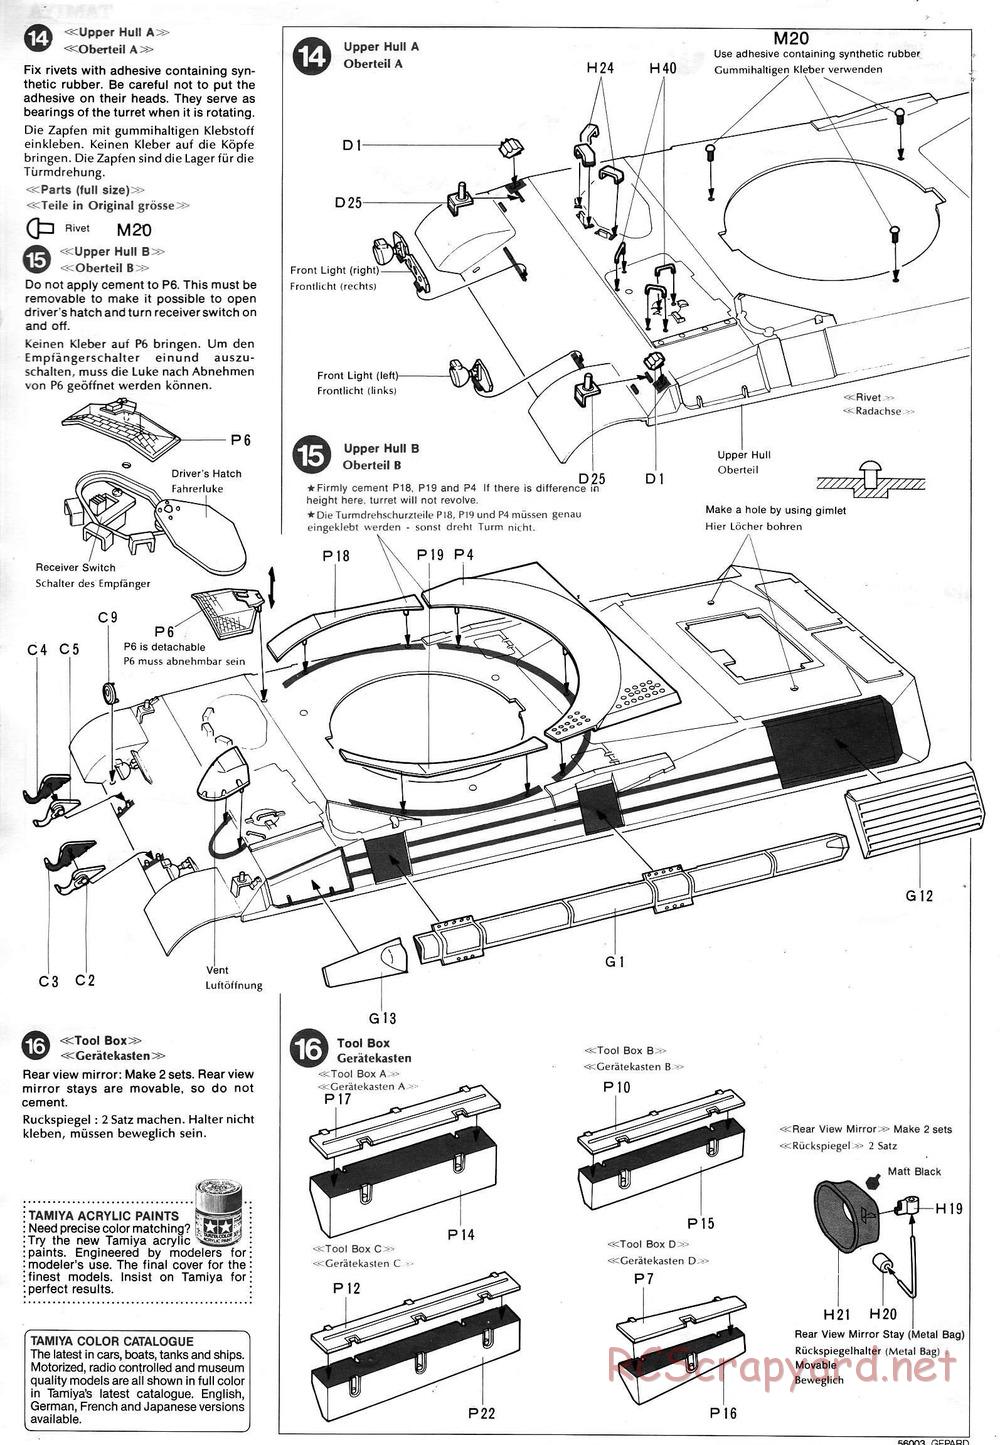 Tamiya - Flakpanzer Gepard - 1/16 Scale Chassis - Manual - Page 8